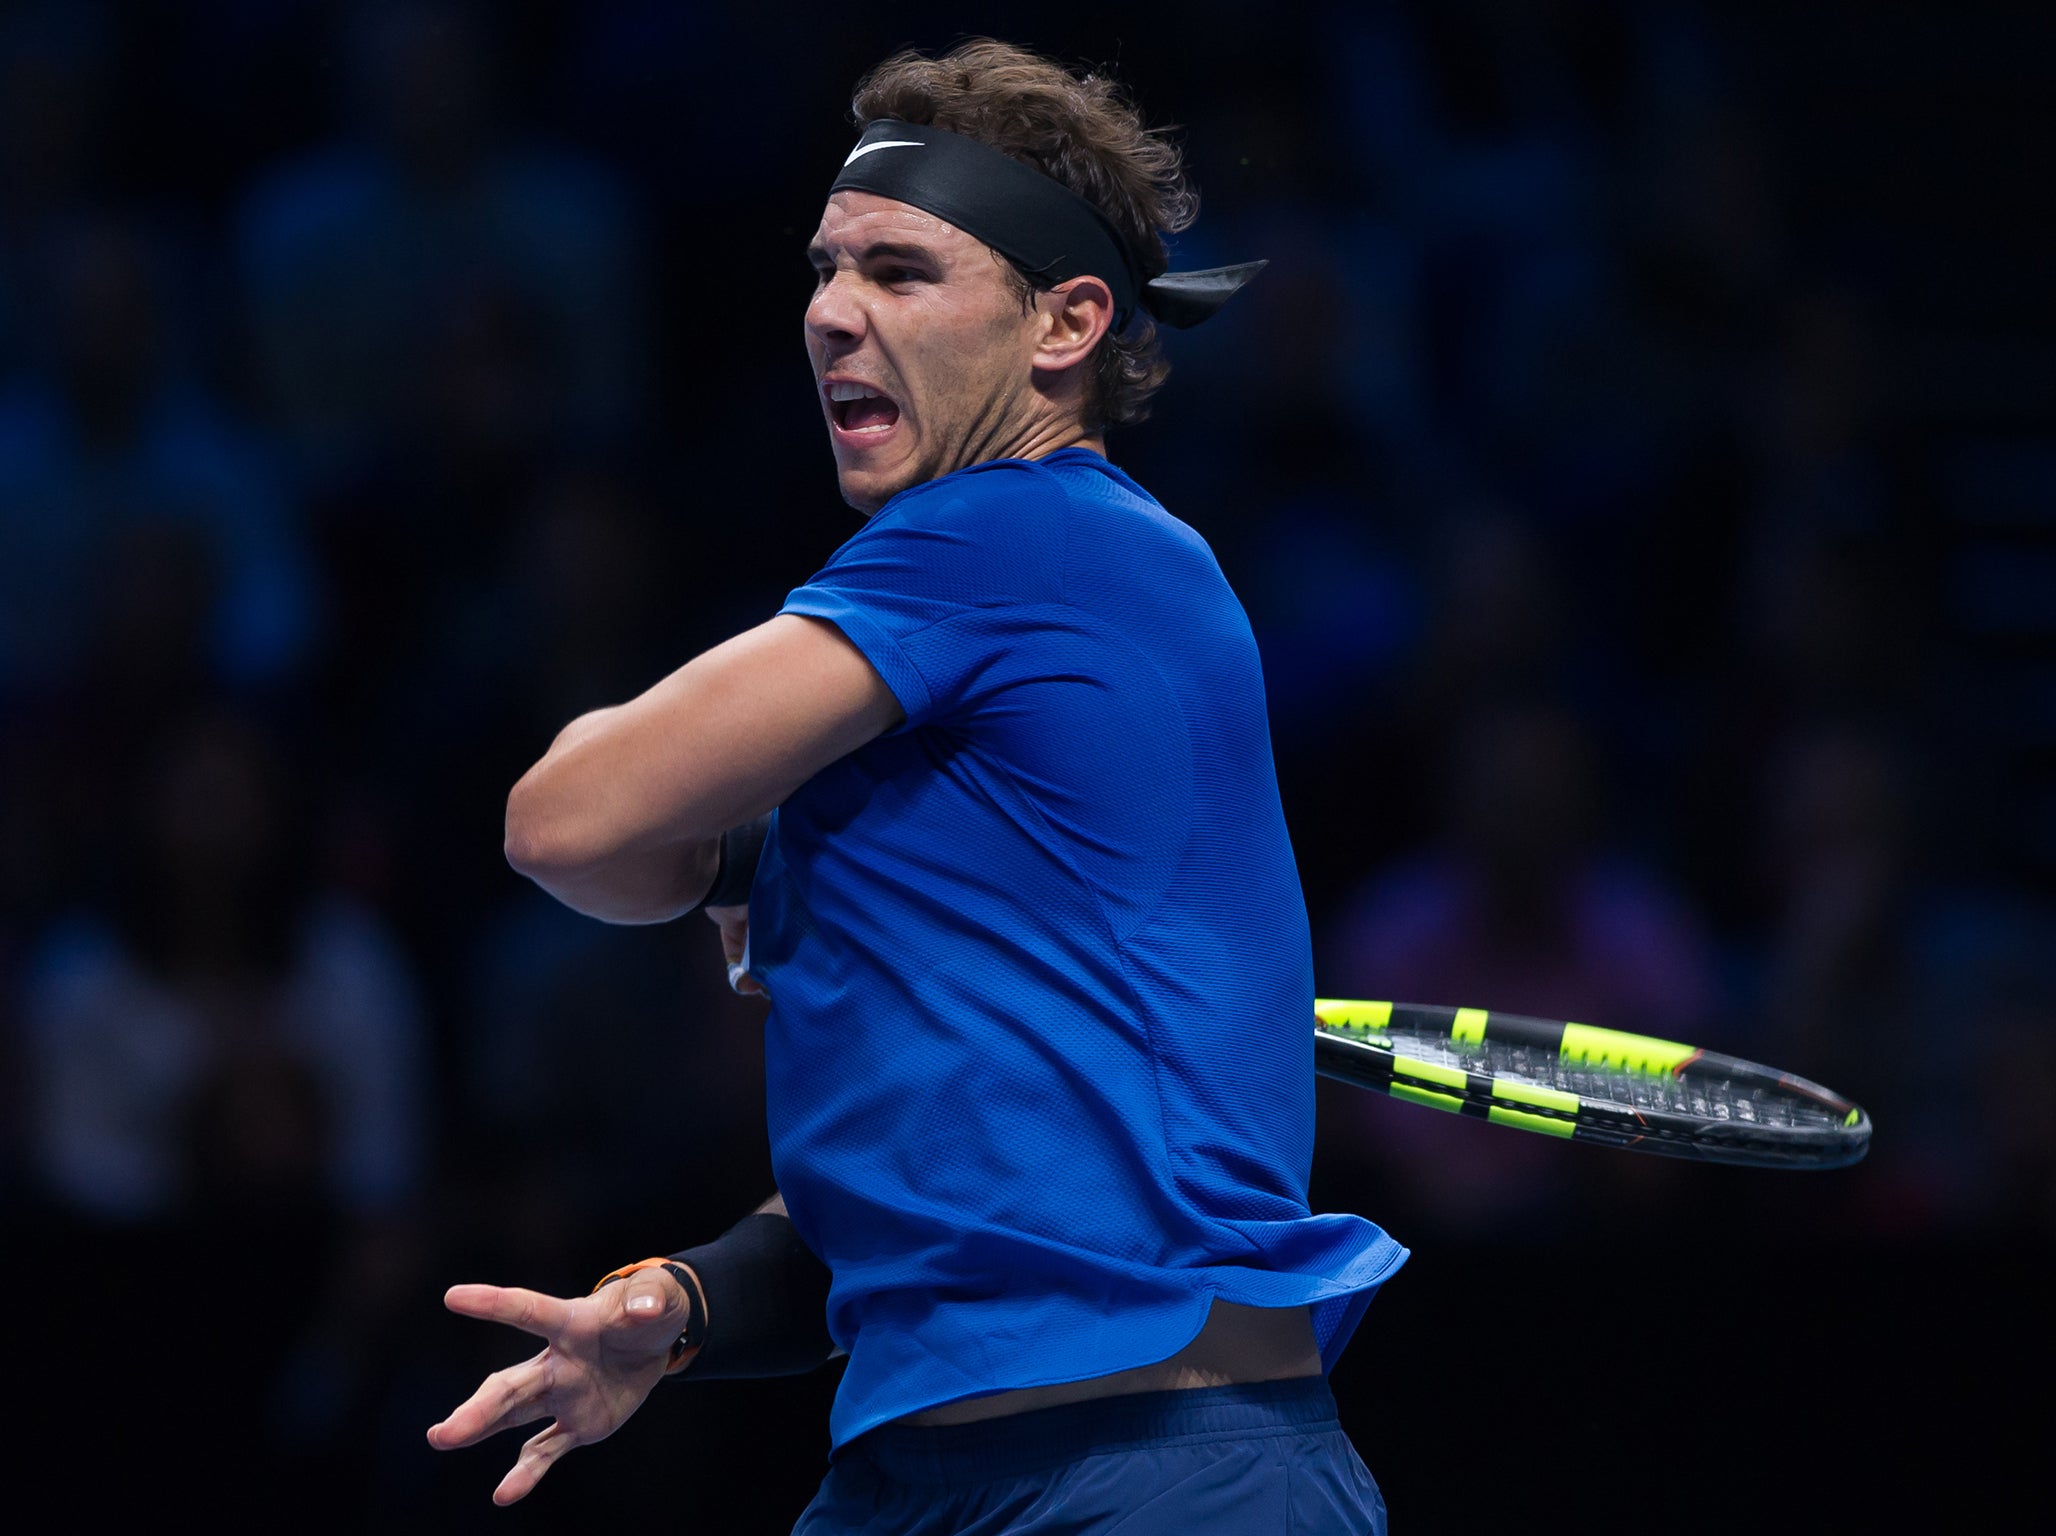 Rafael Nadal has not played since the World Tour Finals in November